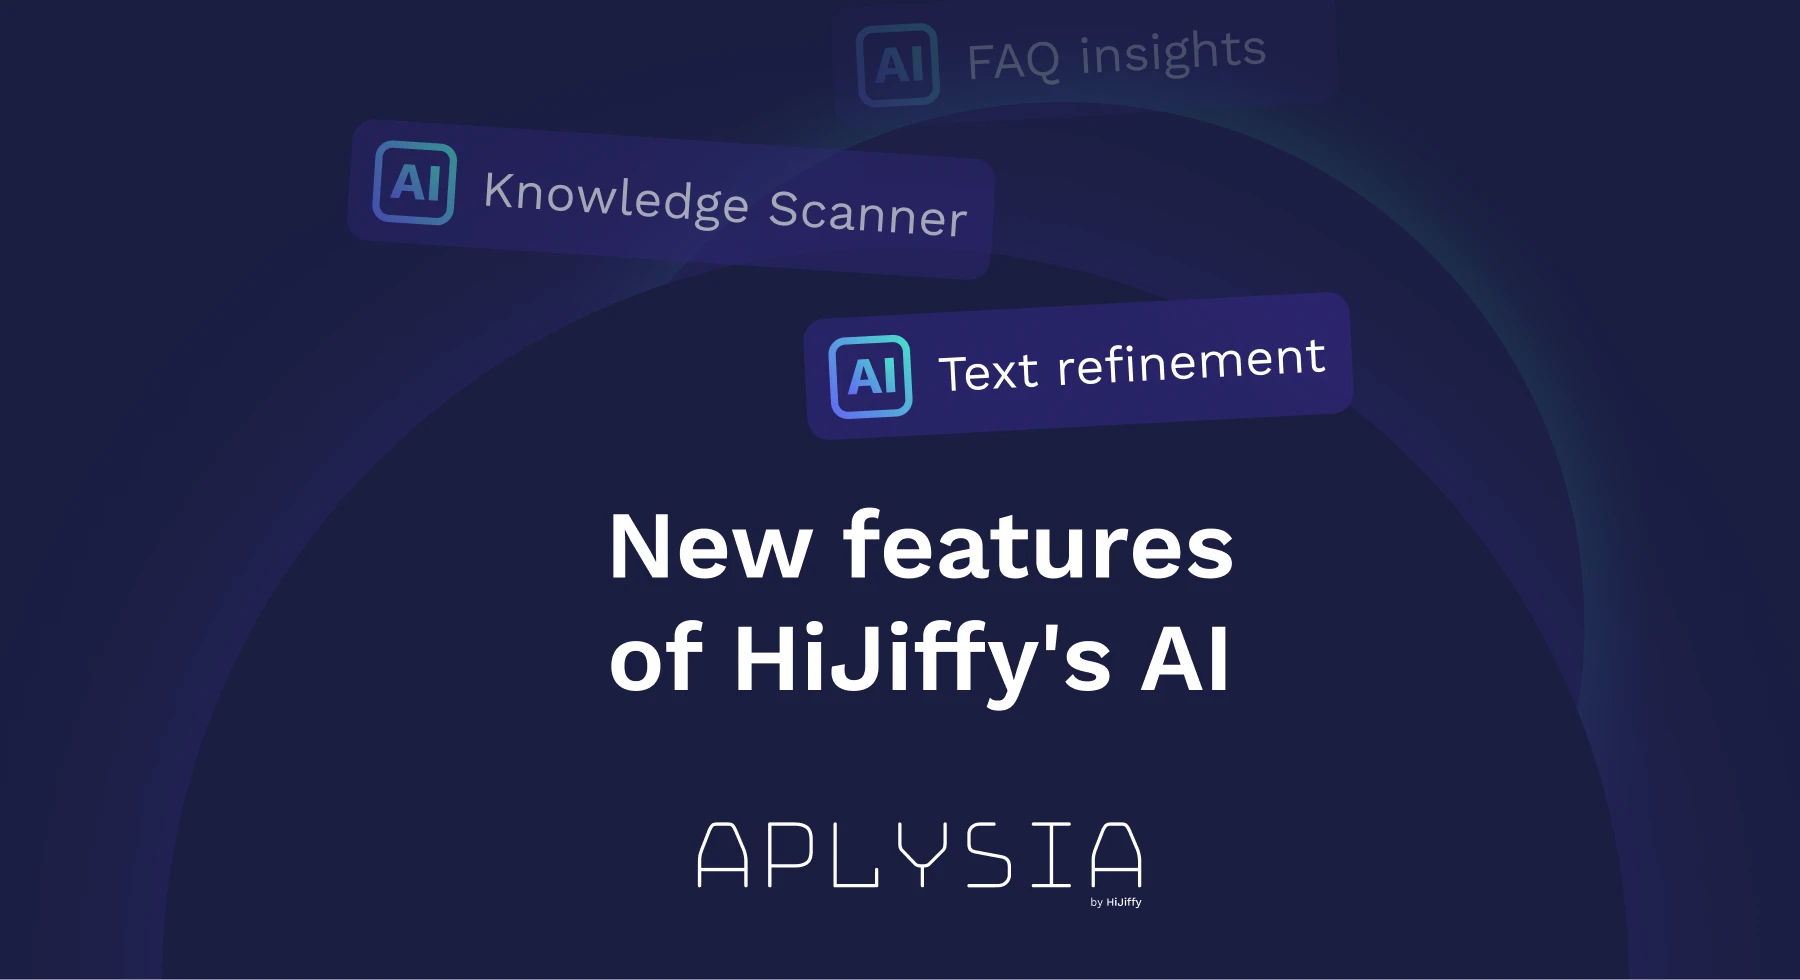 HiJiffy's AI gets new features making deploying AI in hotels simpler